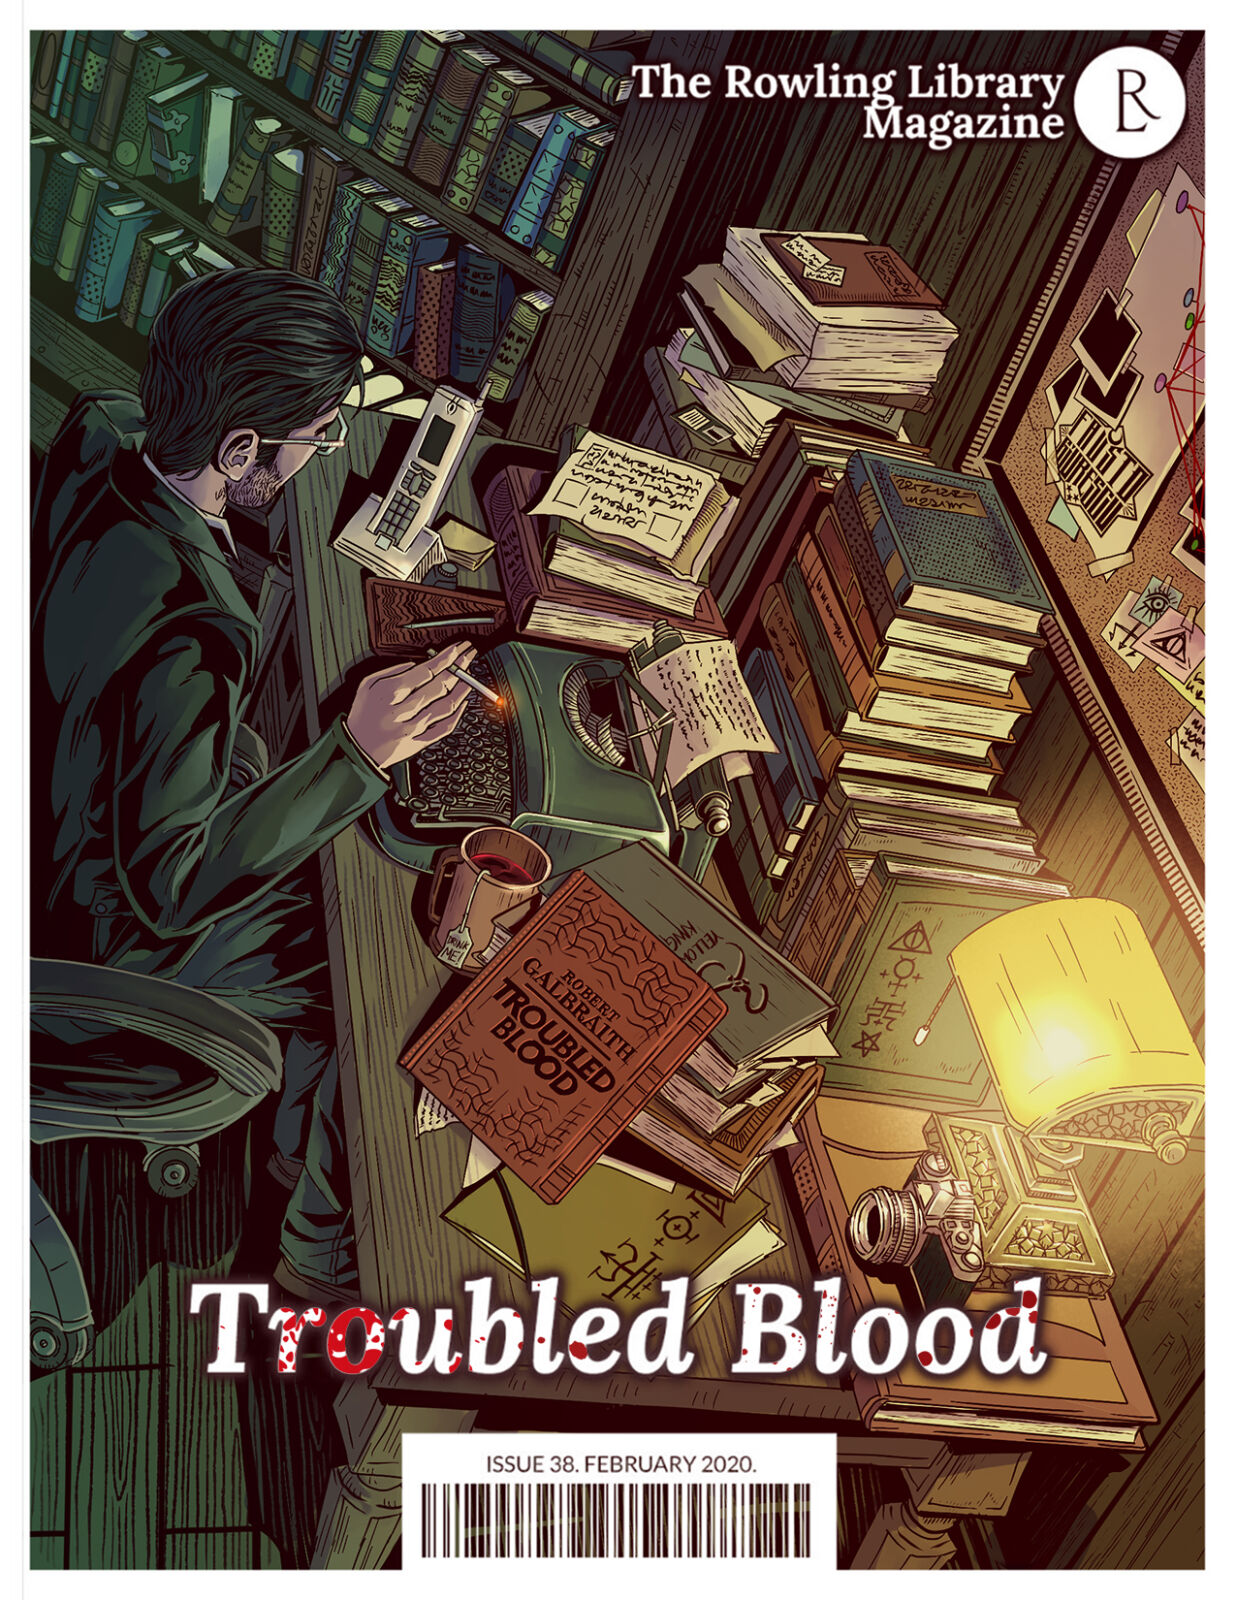 The Rowling Library Magazine #38 (February 2020): Troubled Blood